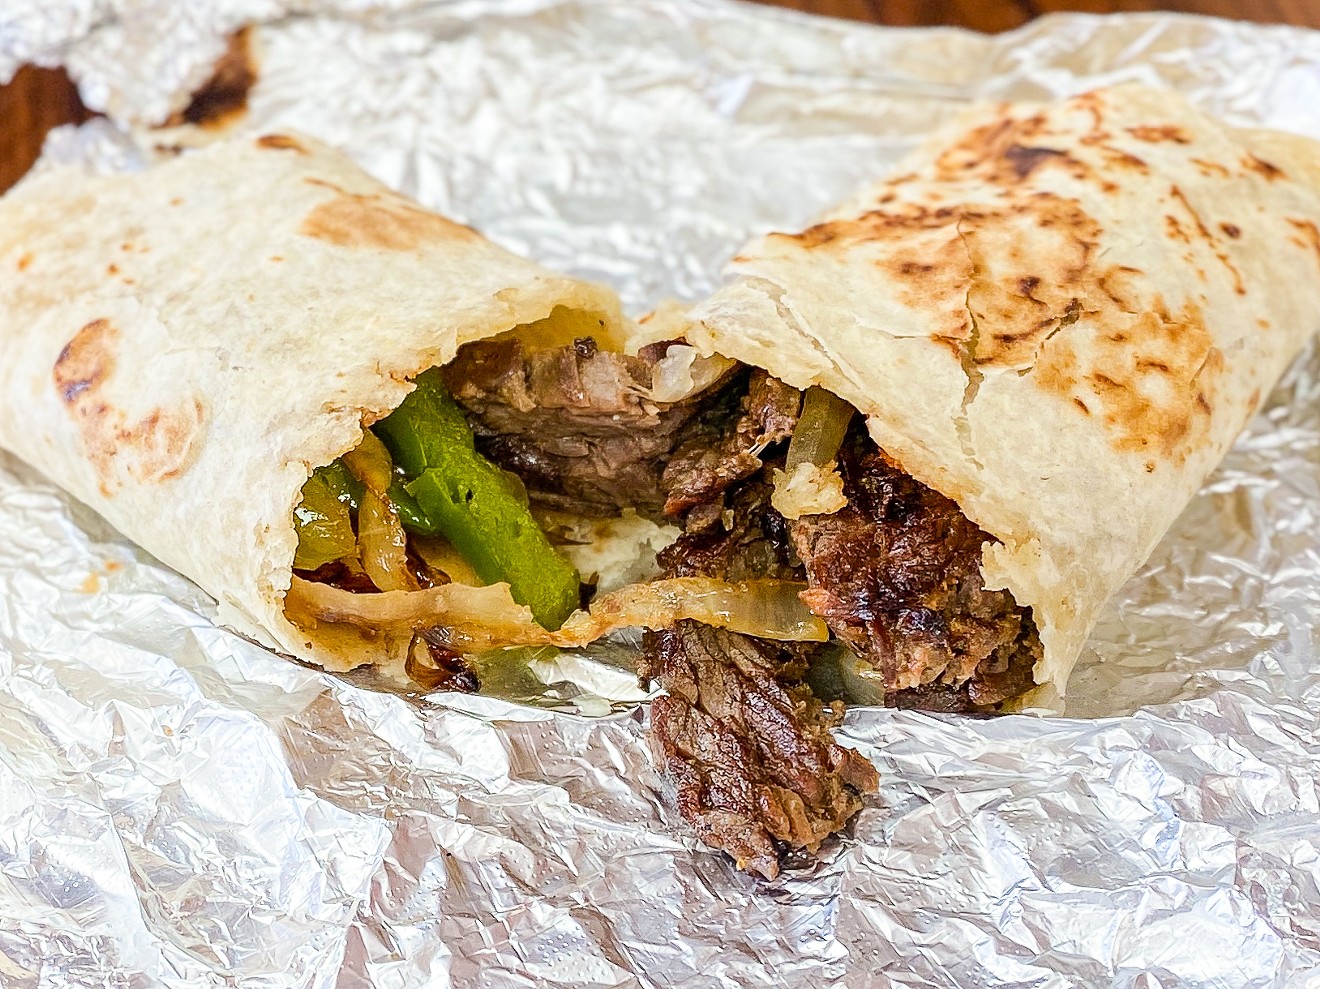 Beef fajita burrito with grilled onions and peppers